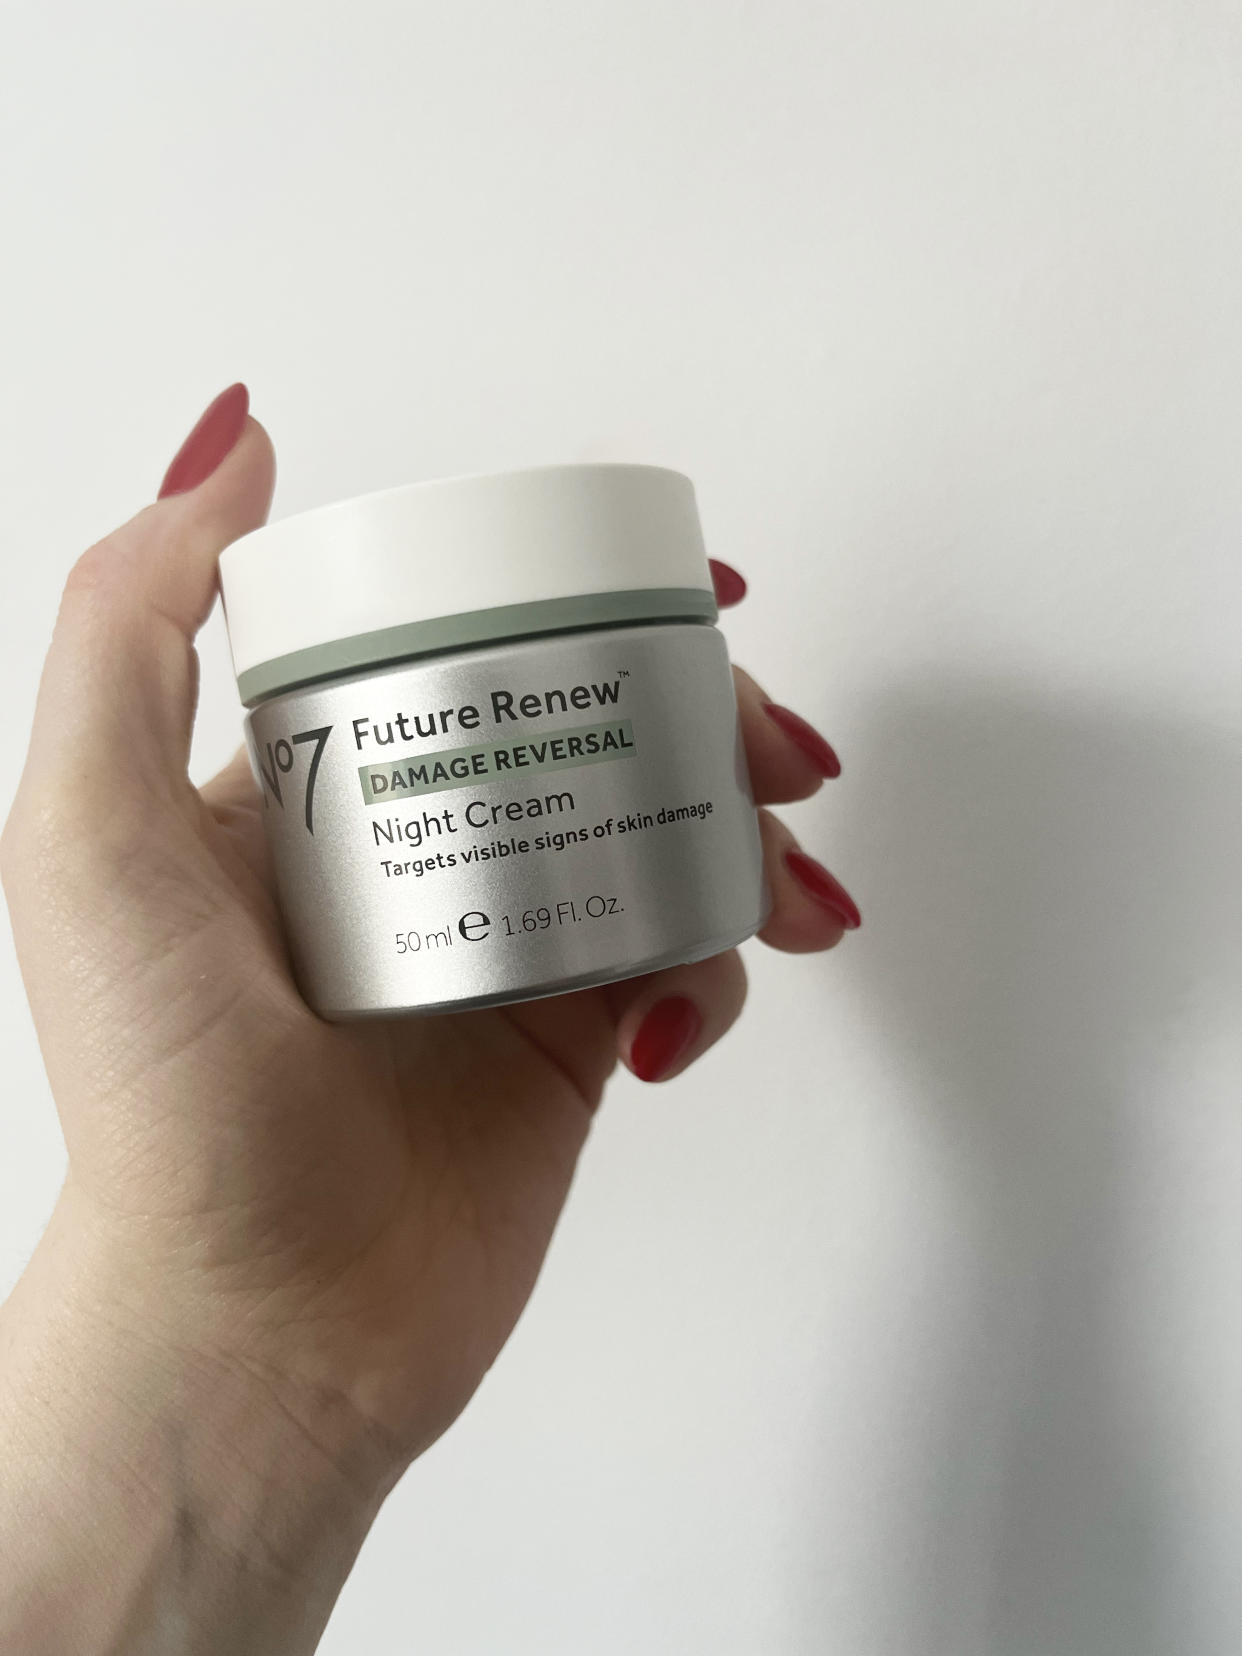 A deeply moisturising, anti-ageing night cream that softens, smooths, hydrates. (Yahoo Life UK)